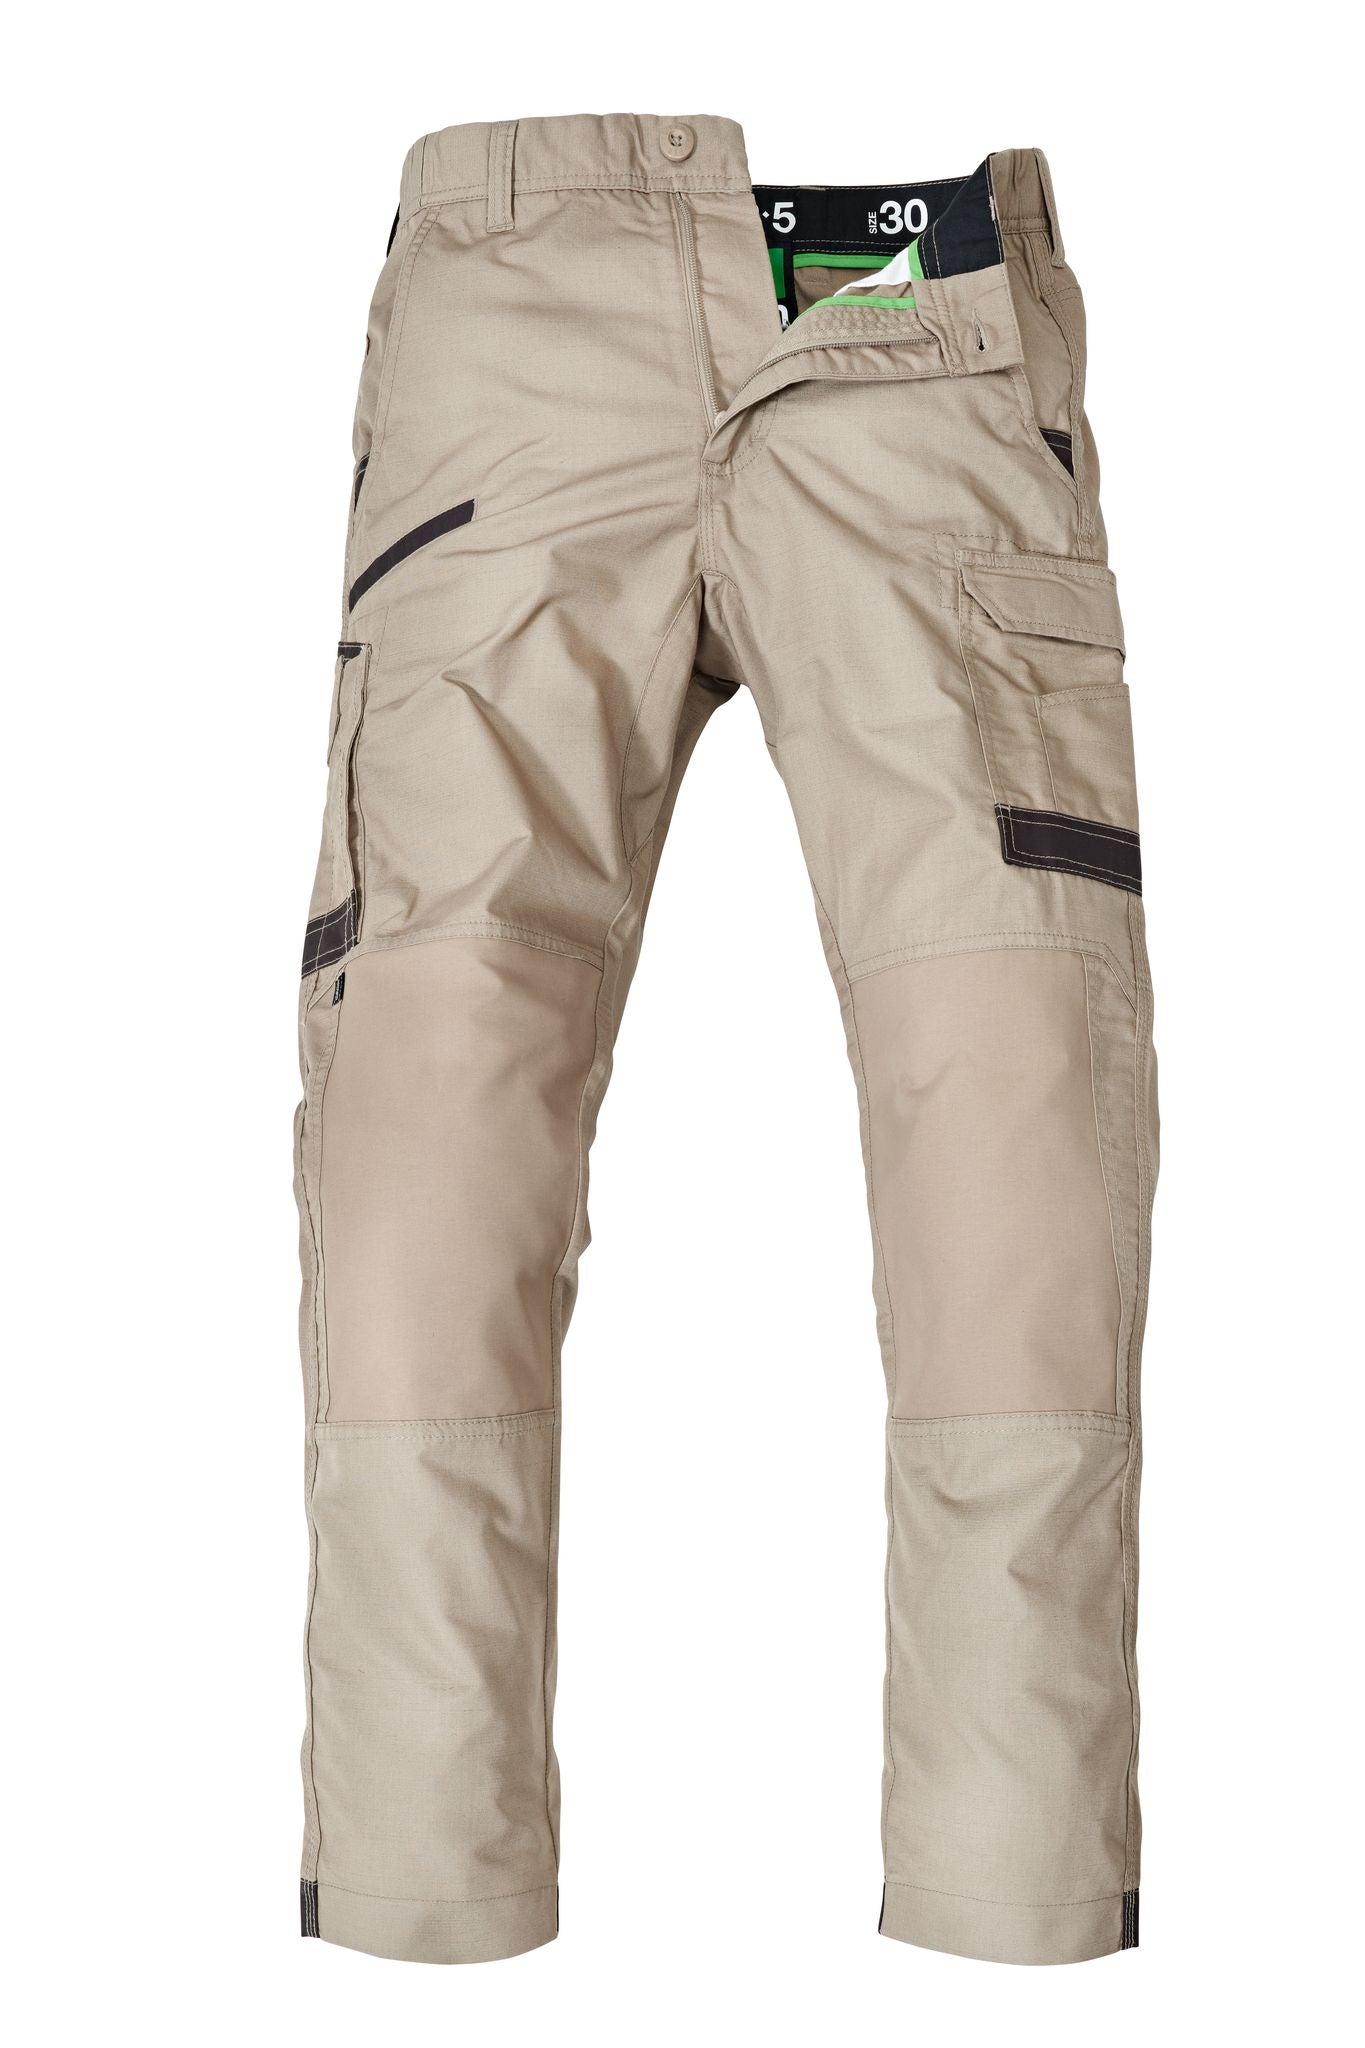 FXD WP-5 Pant